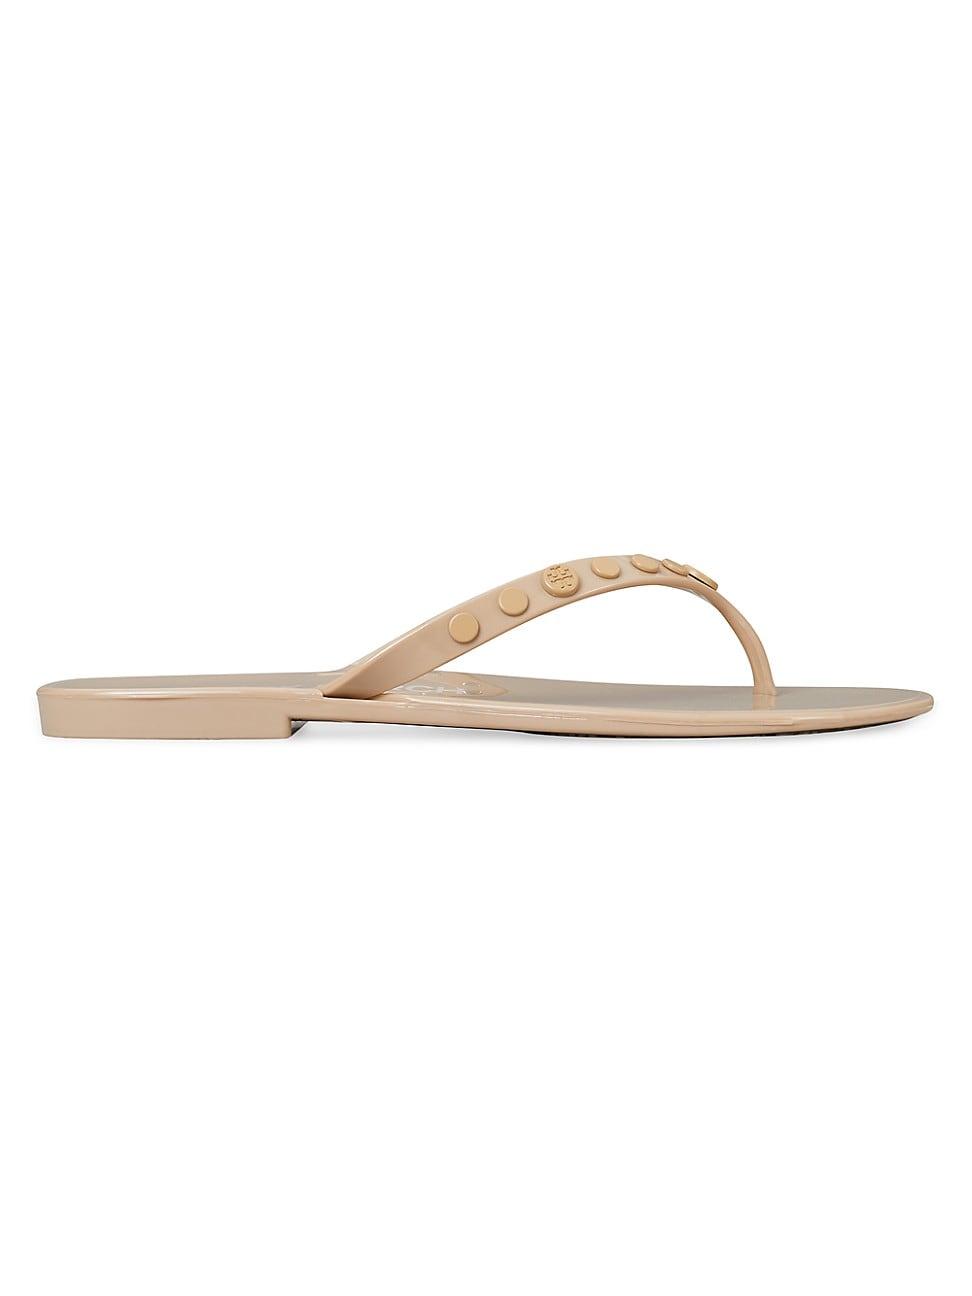 Tory Burch Studded Jelly Thong Sandals in White | Lyst